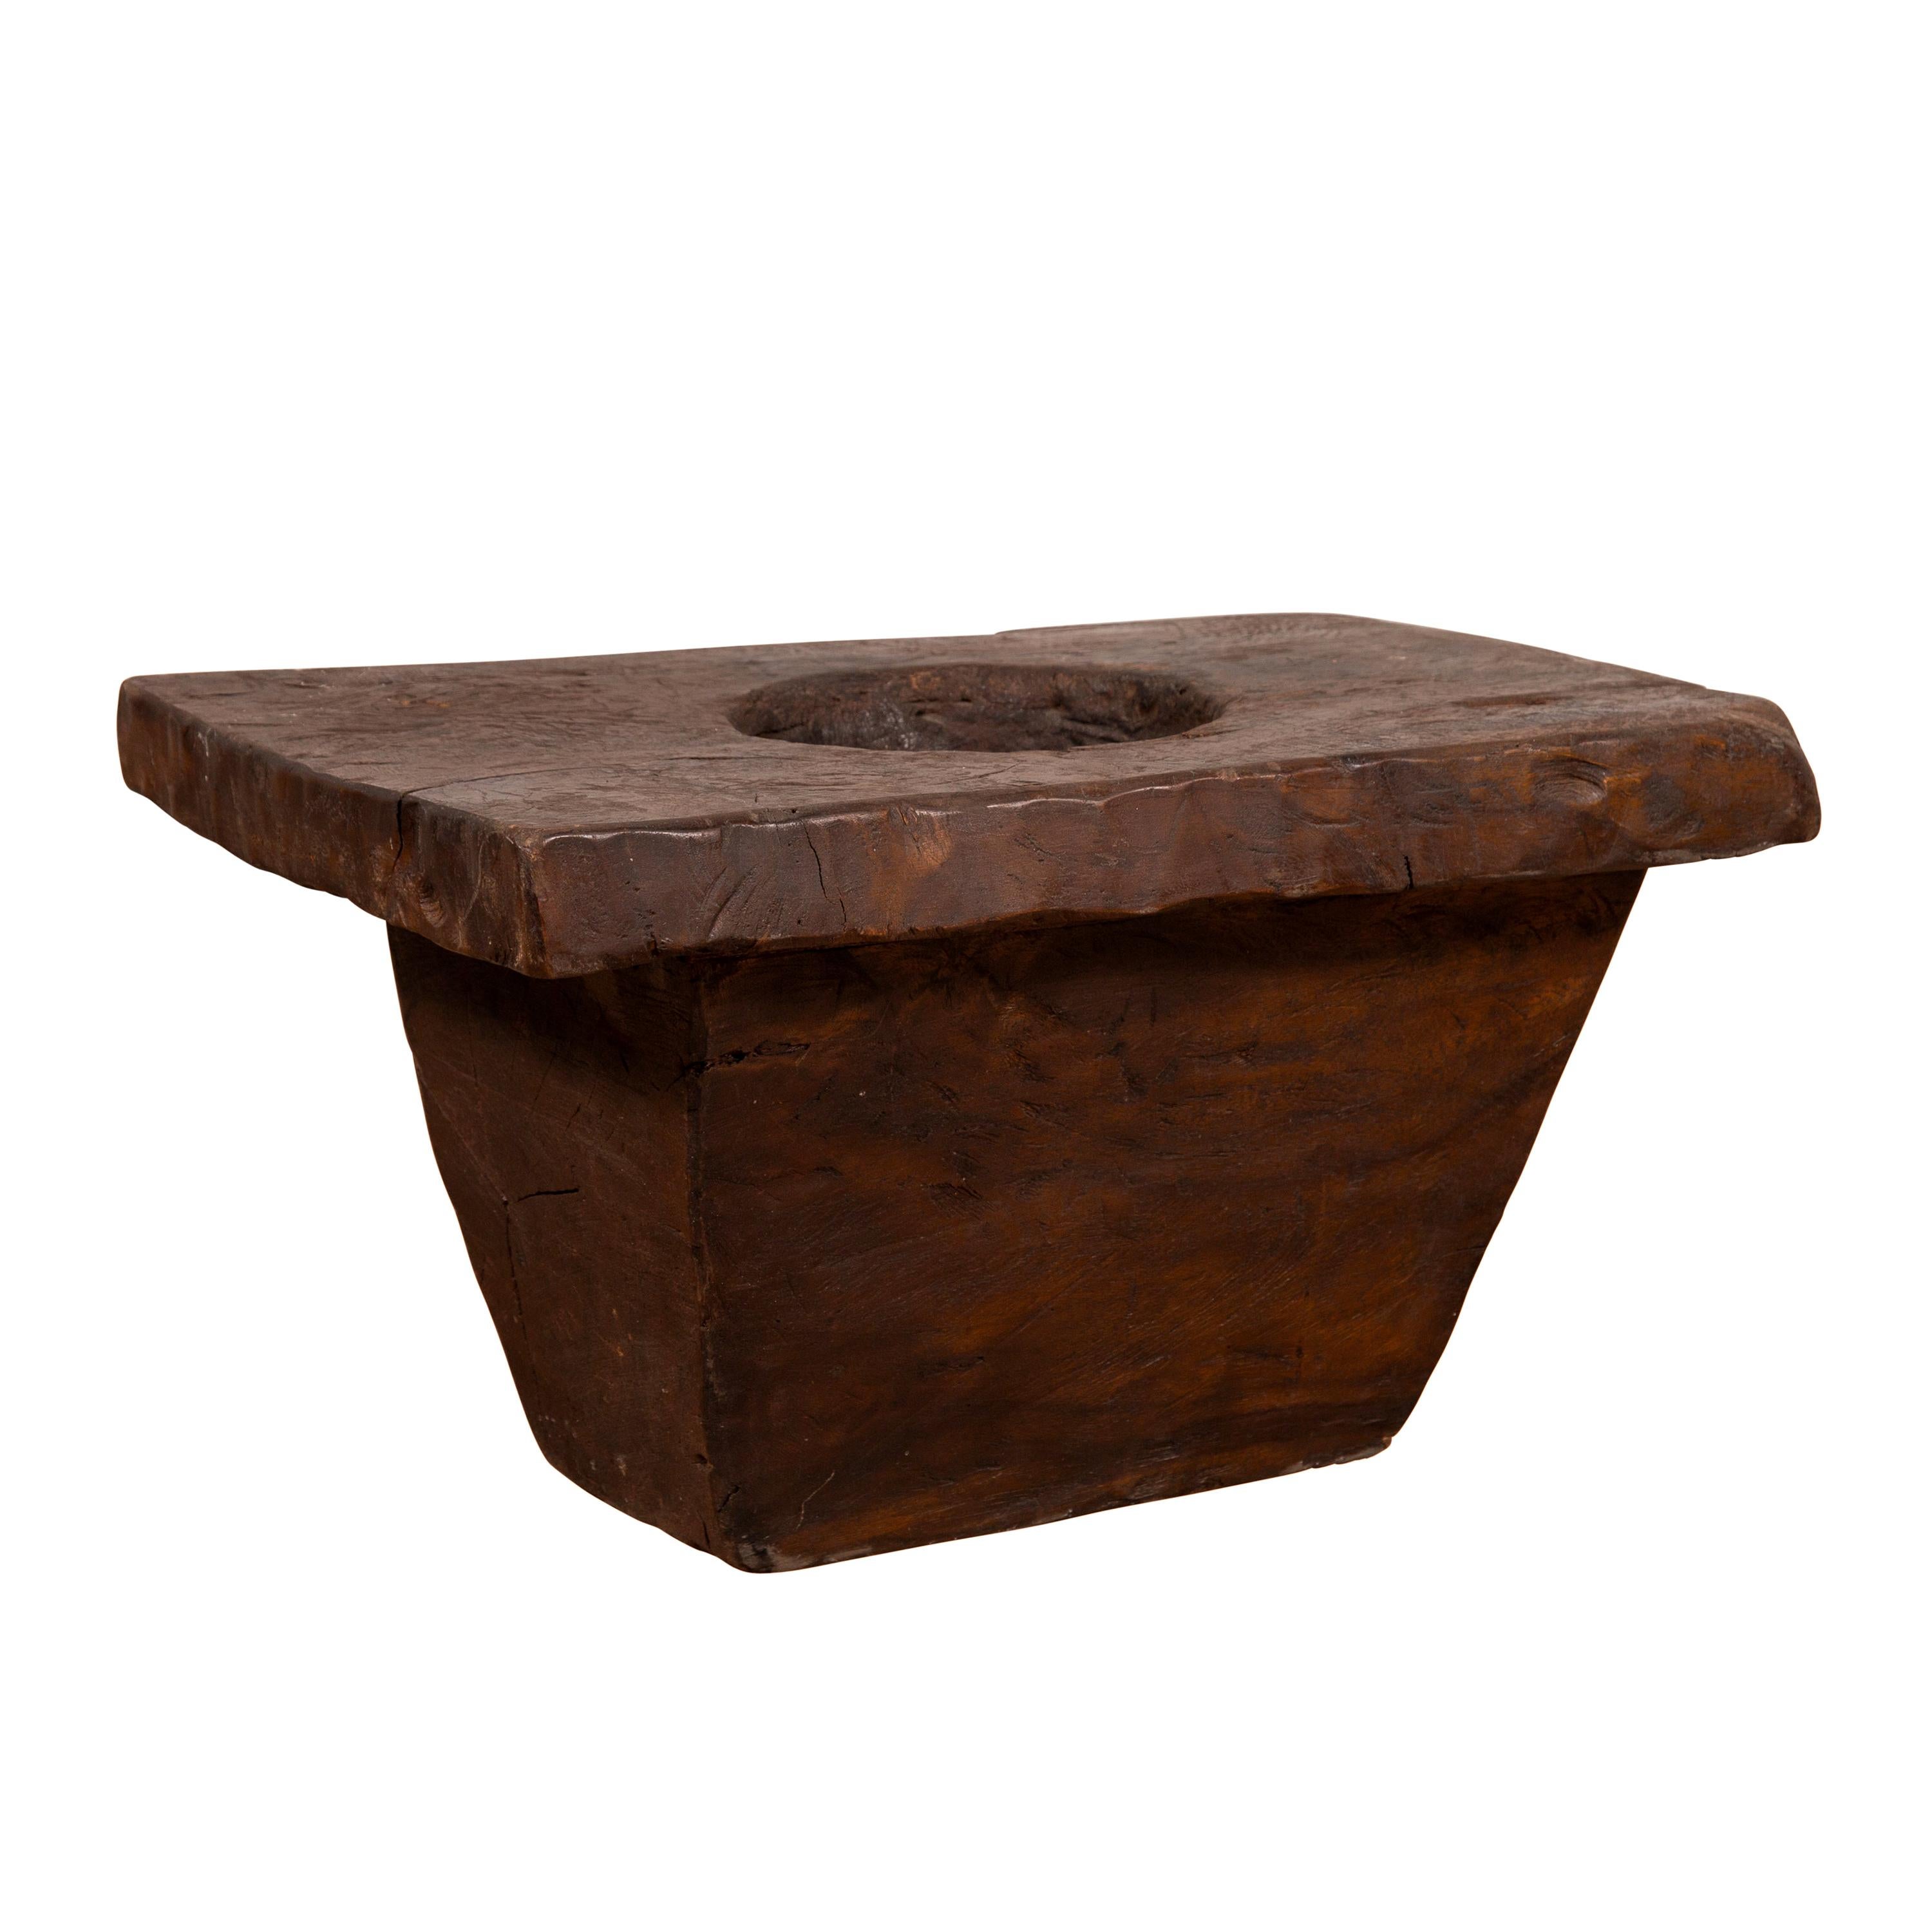 Rustic Antique Indonesian Brown Wooden Planter from the Early 20th Century For Sale